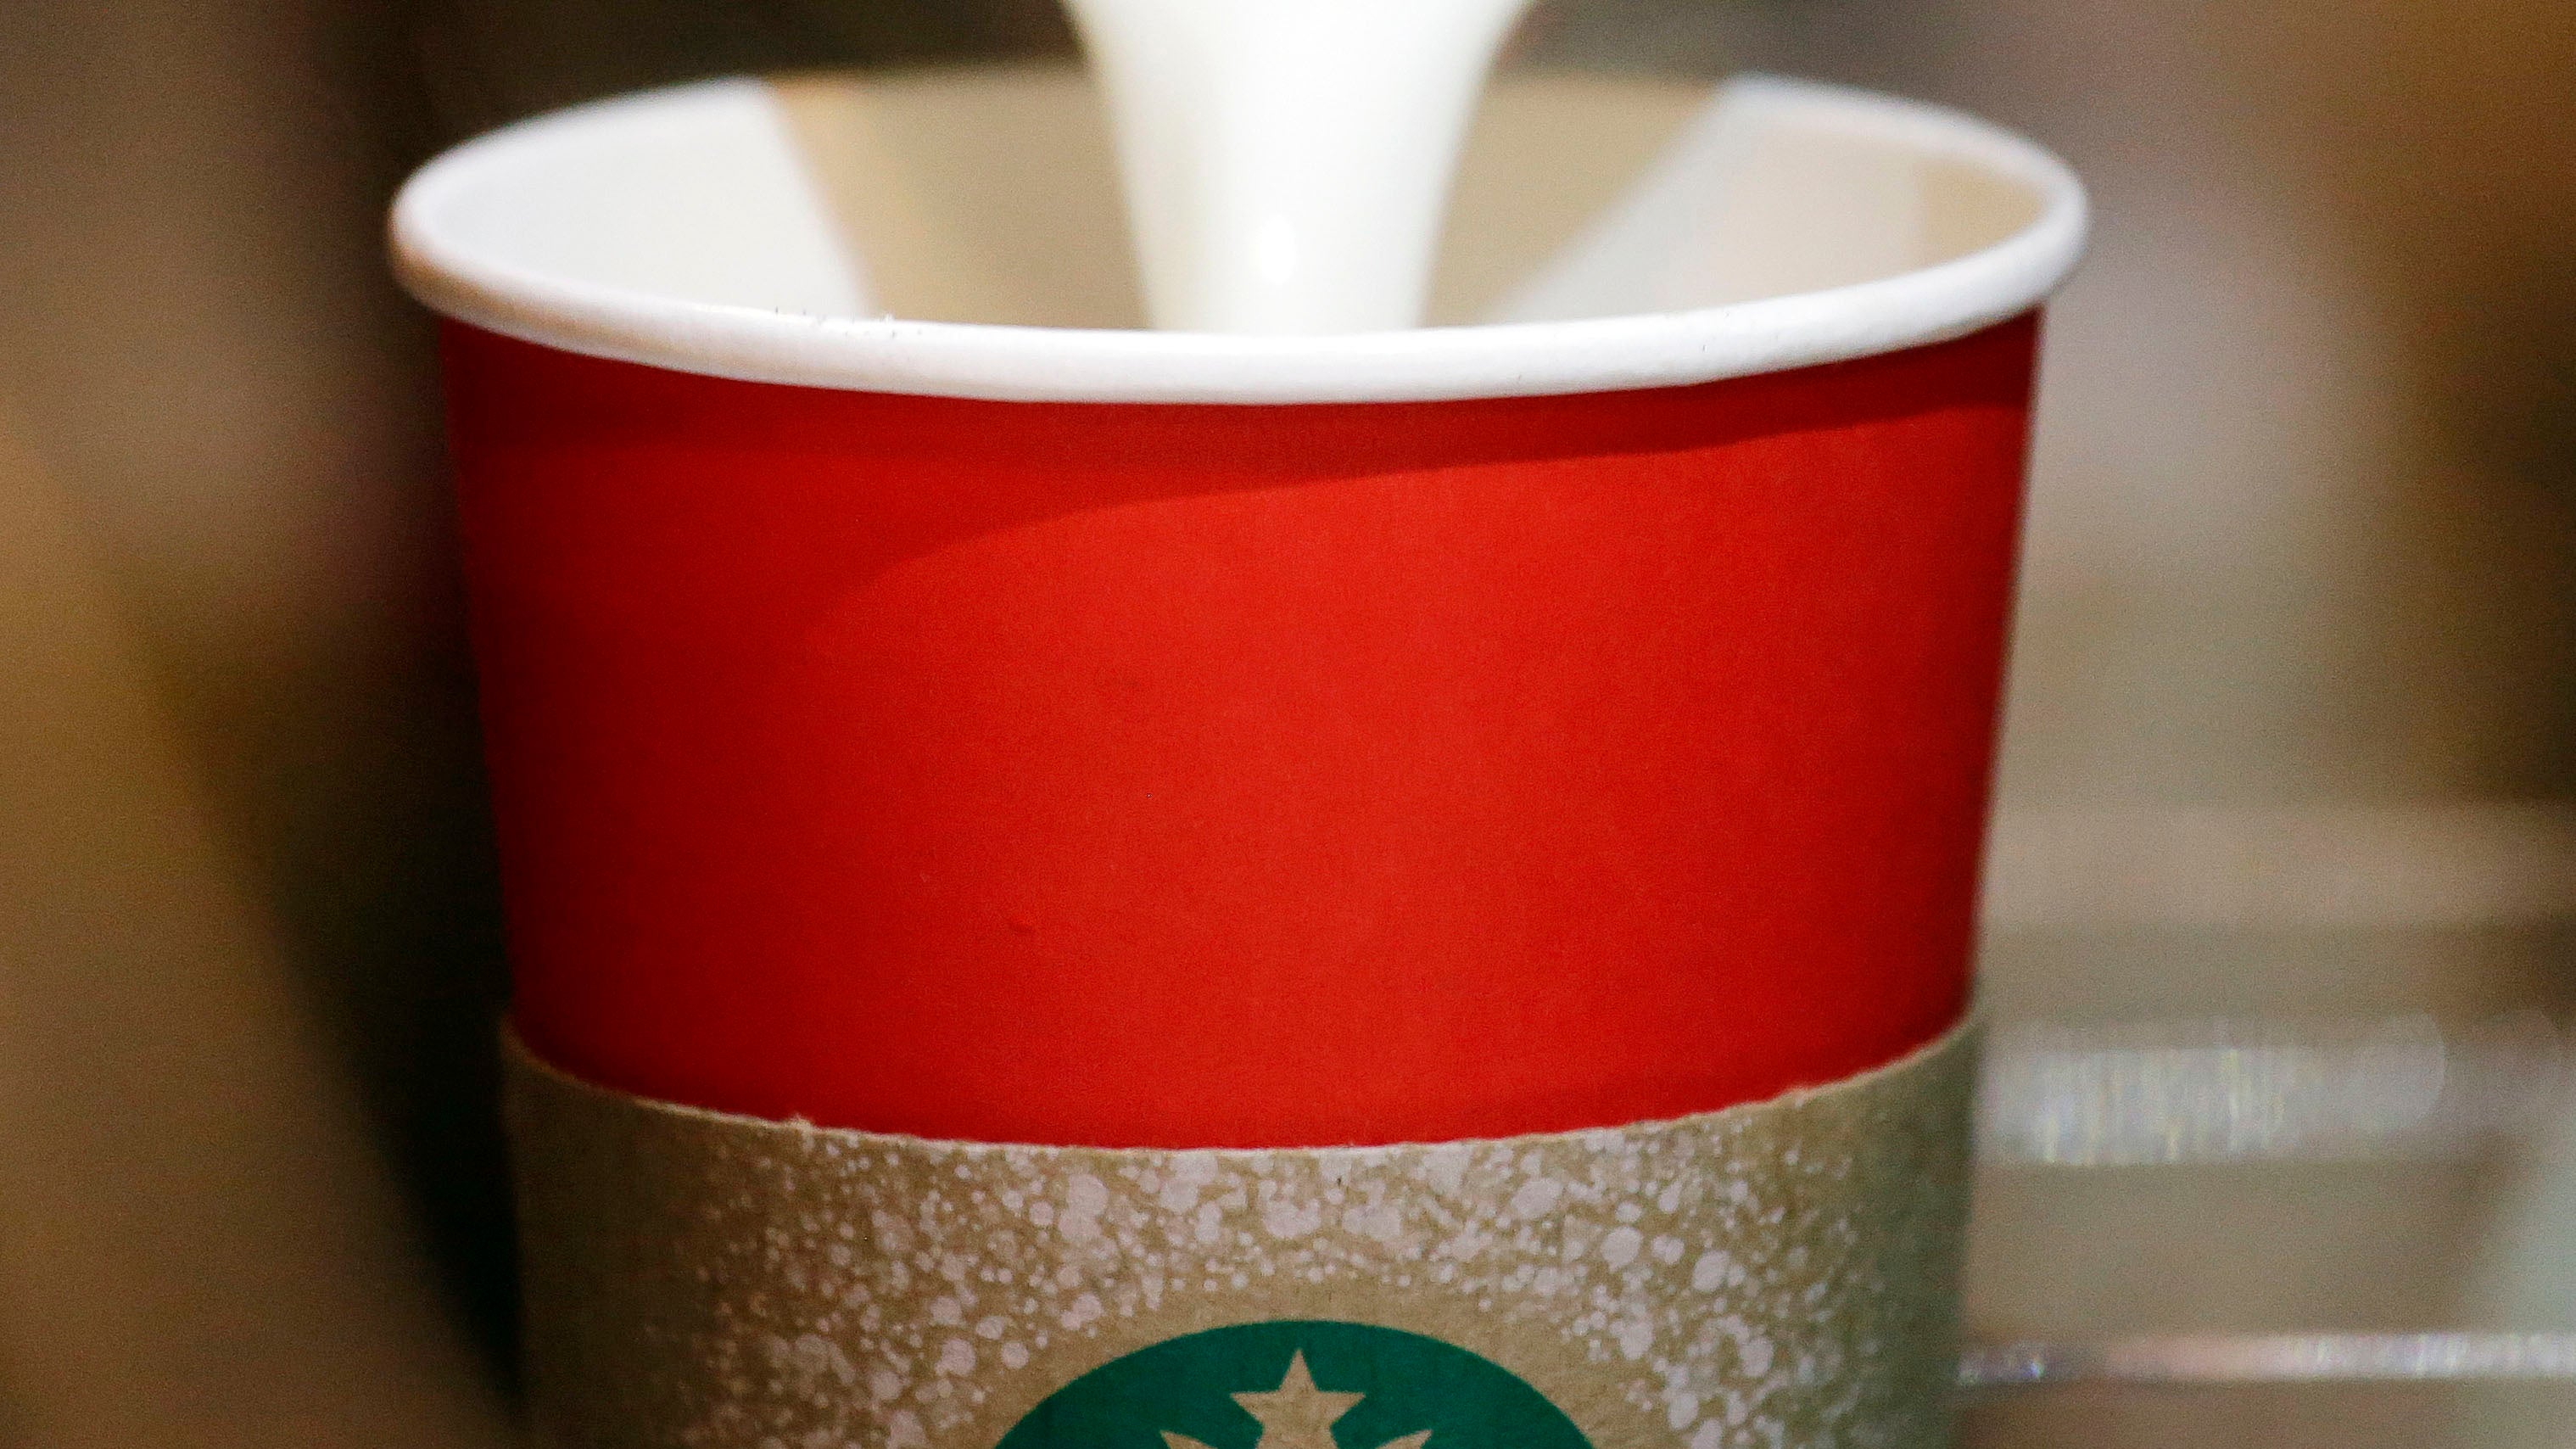  In this Tuesday, Nov. 10, 2015 file photo, a barista pours steamed milk into a red paper cup while making an espresso drink at a Starbucks coffee shop in the Pike Place Market in Seattle. An evangelist's Facebook diatribe criticizing Starbucks for supposedly taking Christ out of Christmas by designing cups without seasonal symbols has garnered millions of views in early November 2012. But few of the those known for longstanding concerns about a so-called 'War on Christmas' are joining his complaint. Others wonder how this controversy, if indeed it is one, fits into the long history of squabbles over the place of Christmas in the public square. (Elaine Thompson/AP Photo) 